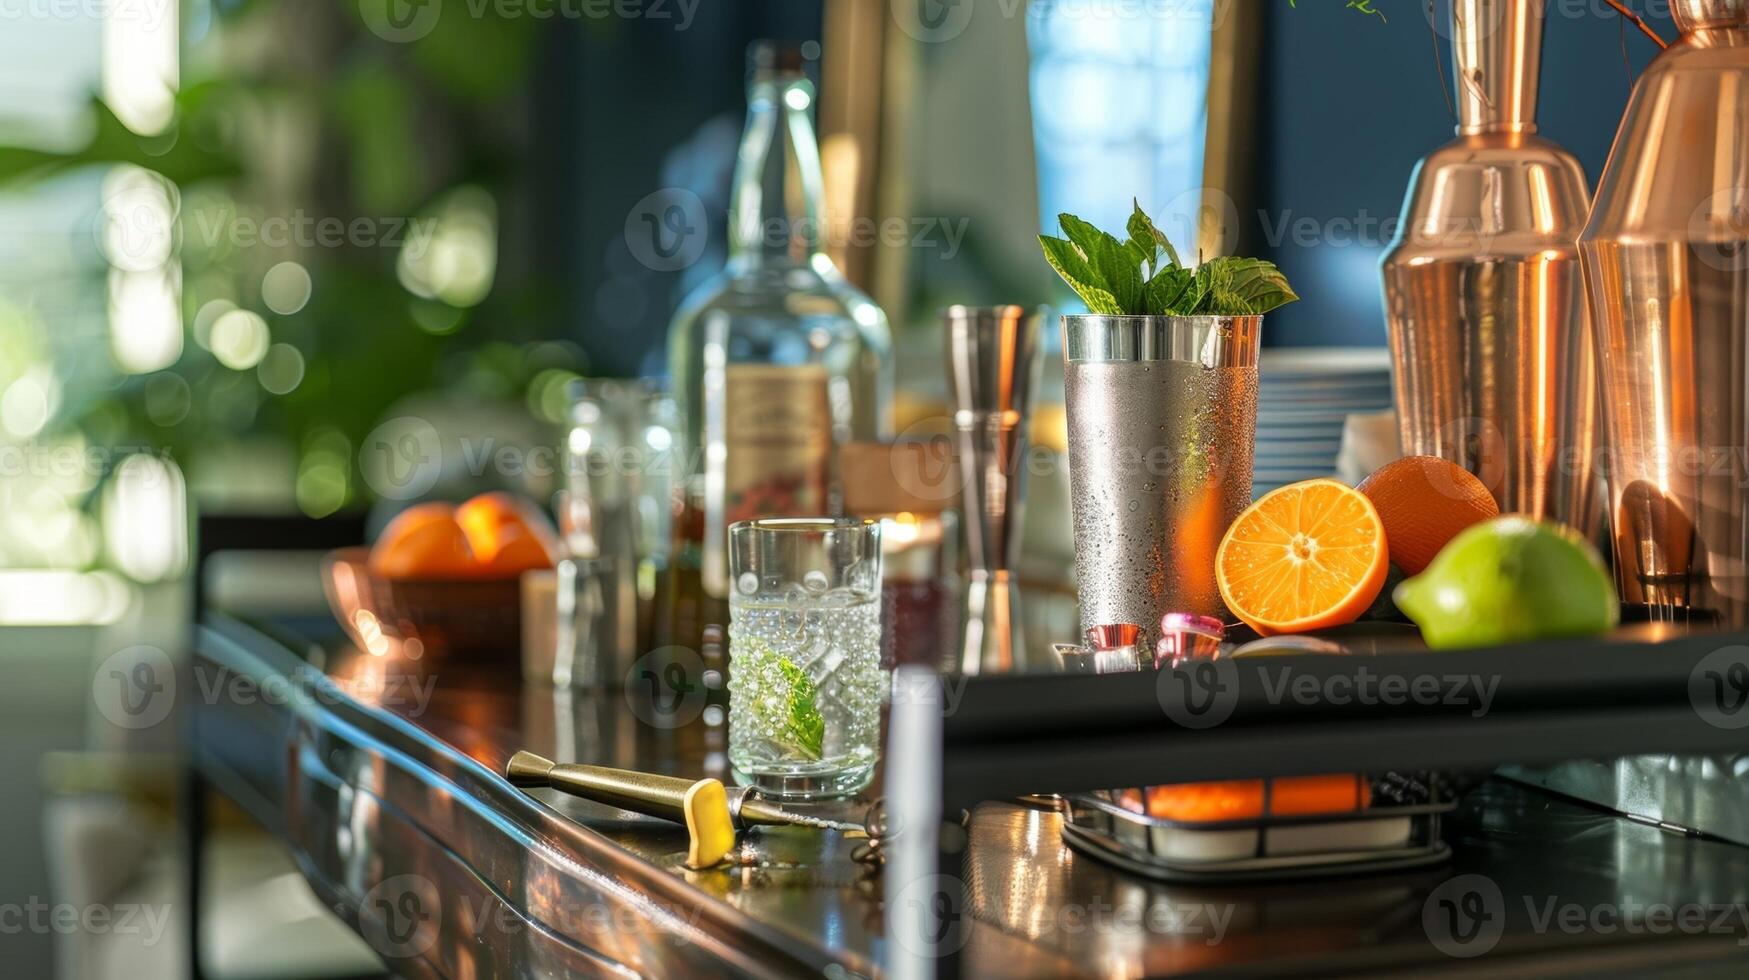 A decorative bar cart stocked with the necessary tools and ingredients from the DIY mocktail crafting kit ready for a night of creative mixology photo